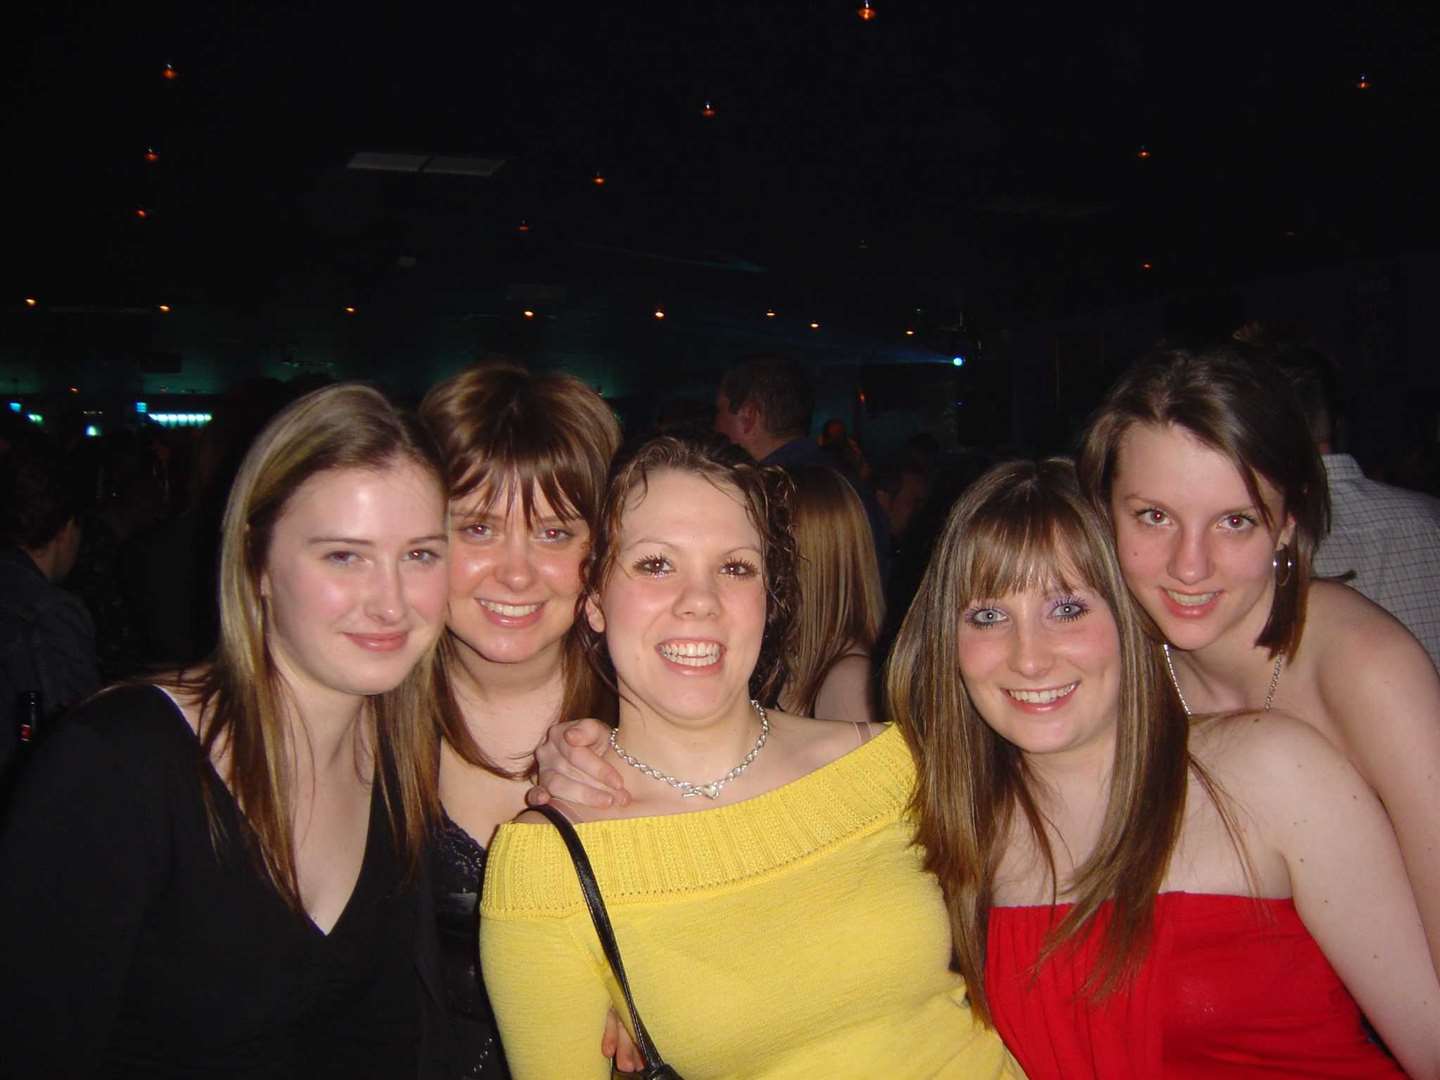 A top night at Tantra in 2004